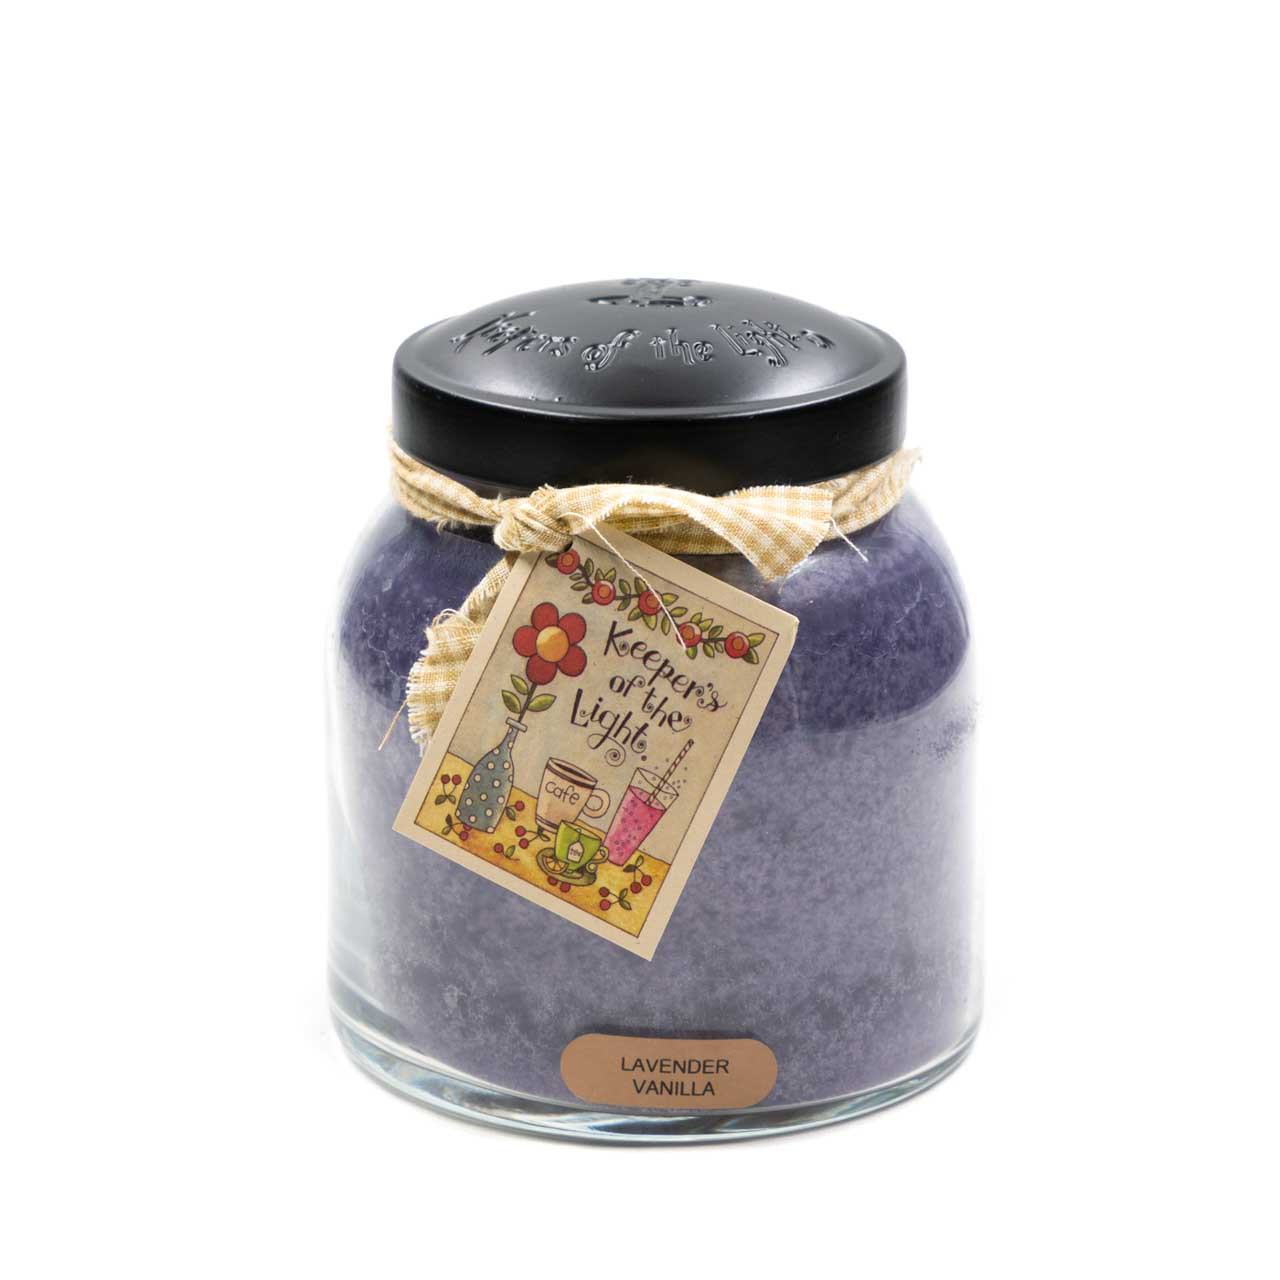 A Cheerful Giver Lavender Vanilla Jar Candle, 24-Ounce